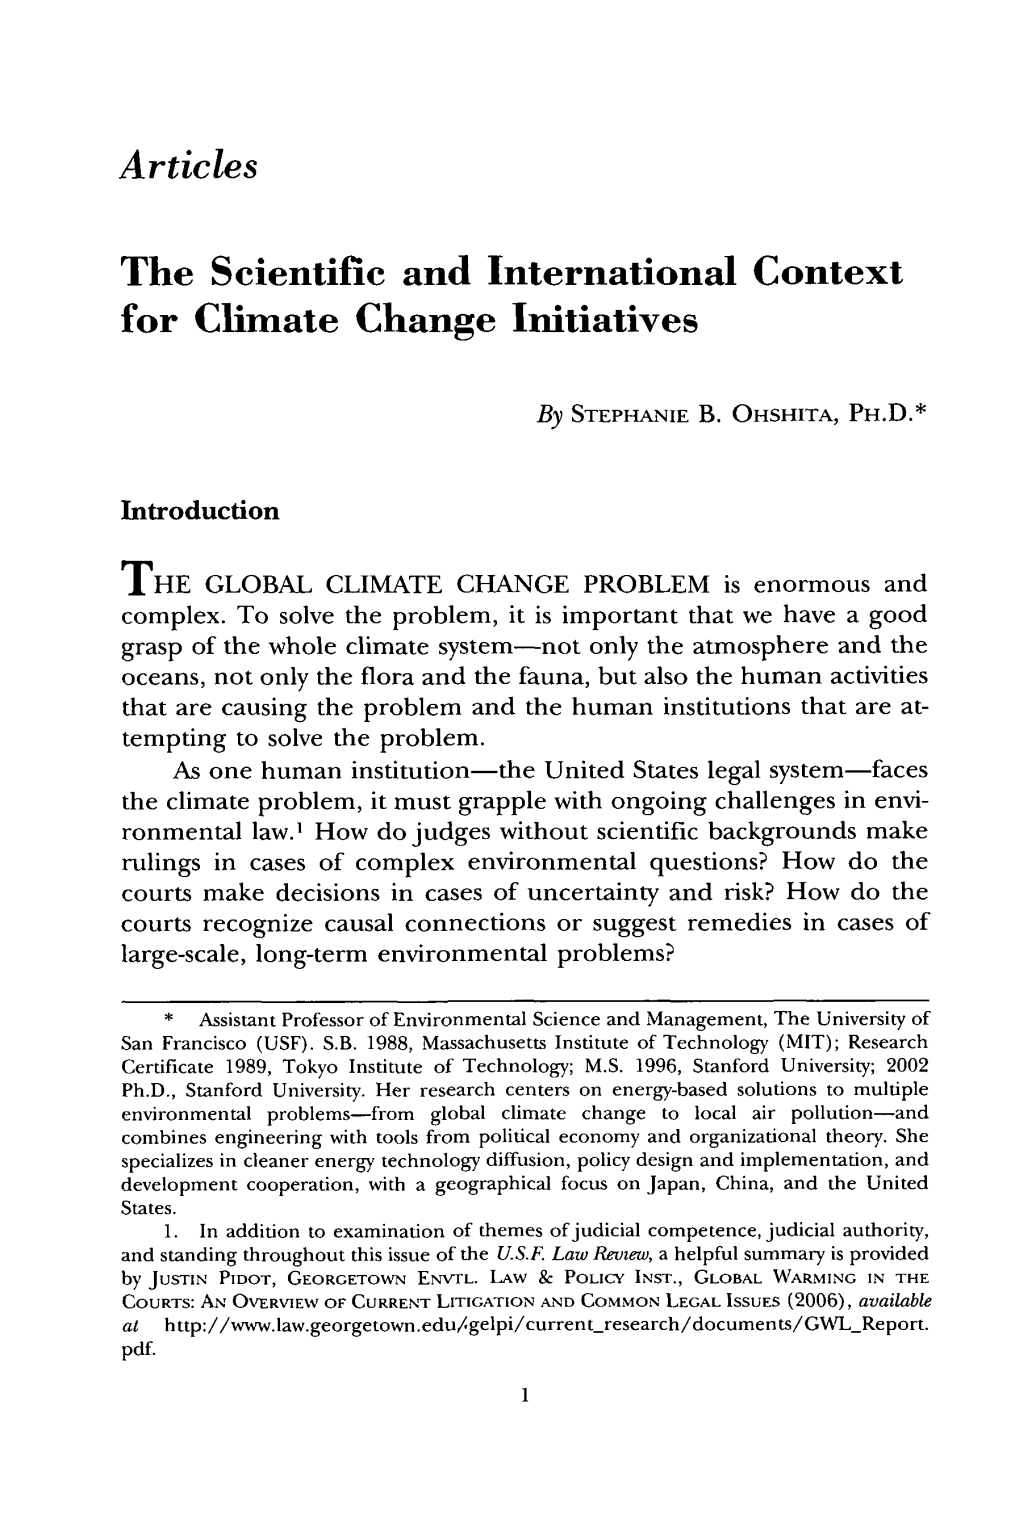 The Scientific and International Context for Climate Change Initiatives